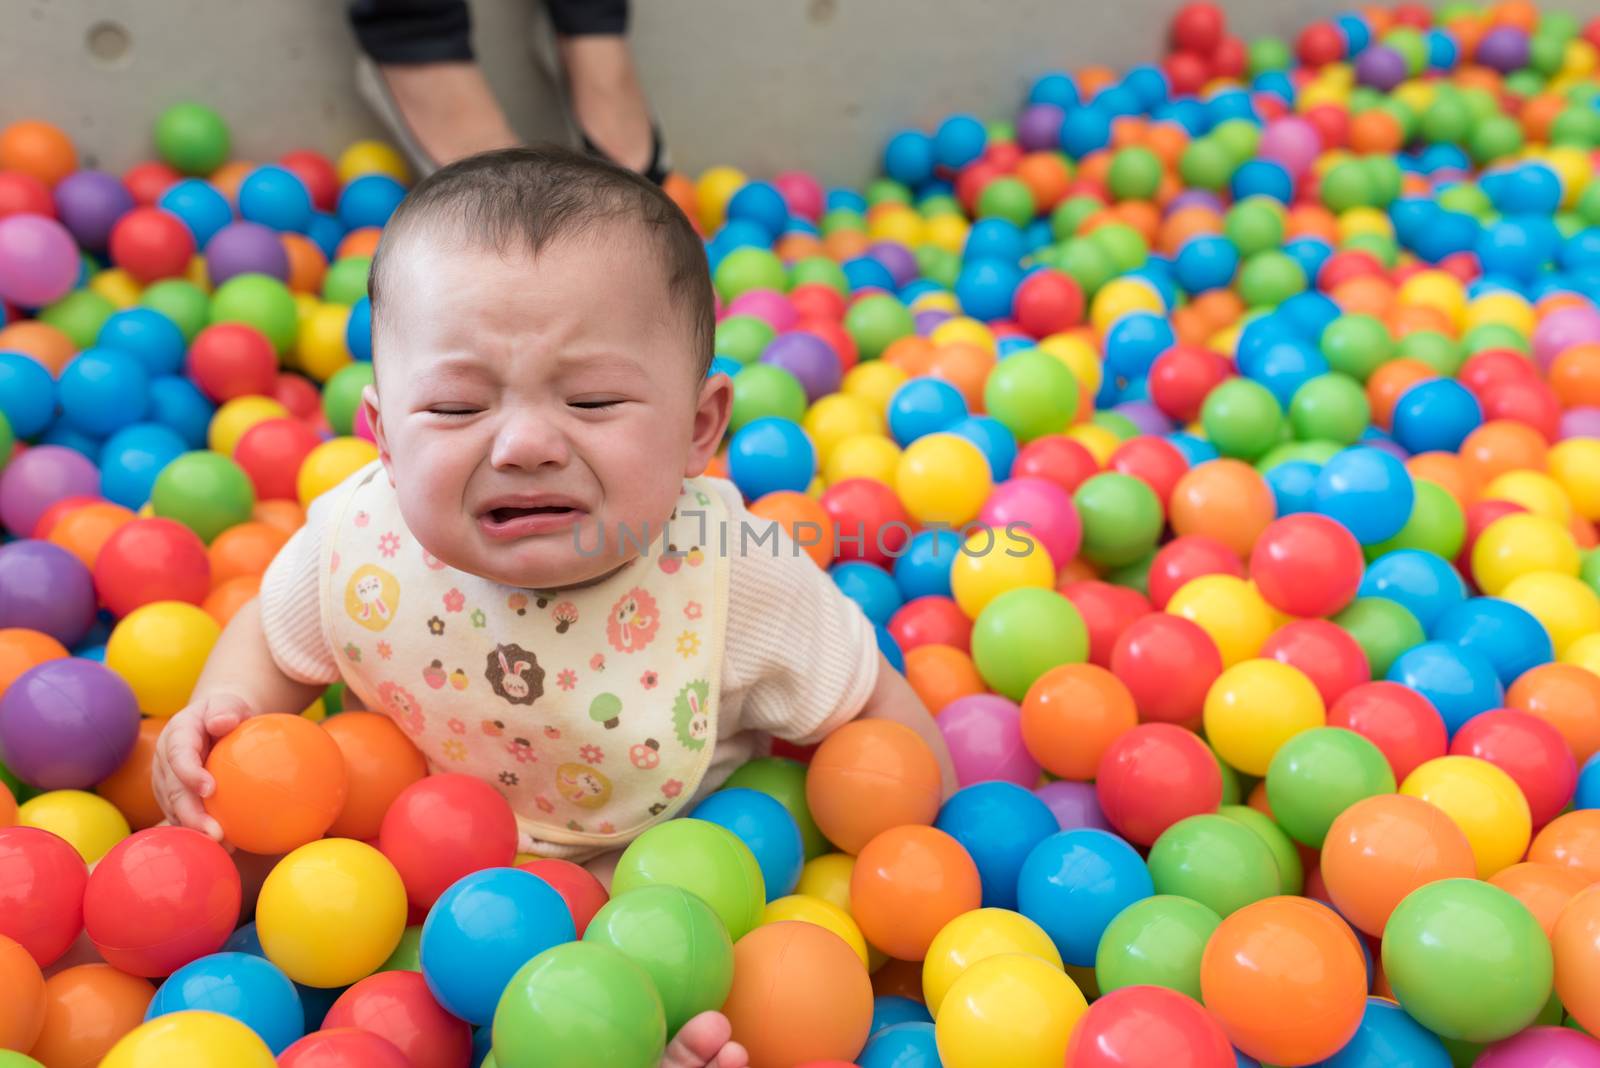 Crying Baby Girl in Ball Pit by justtscott